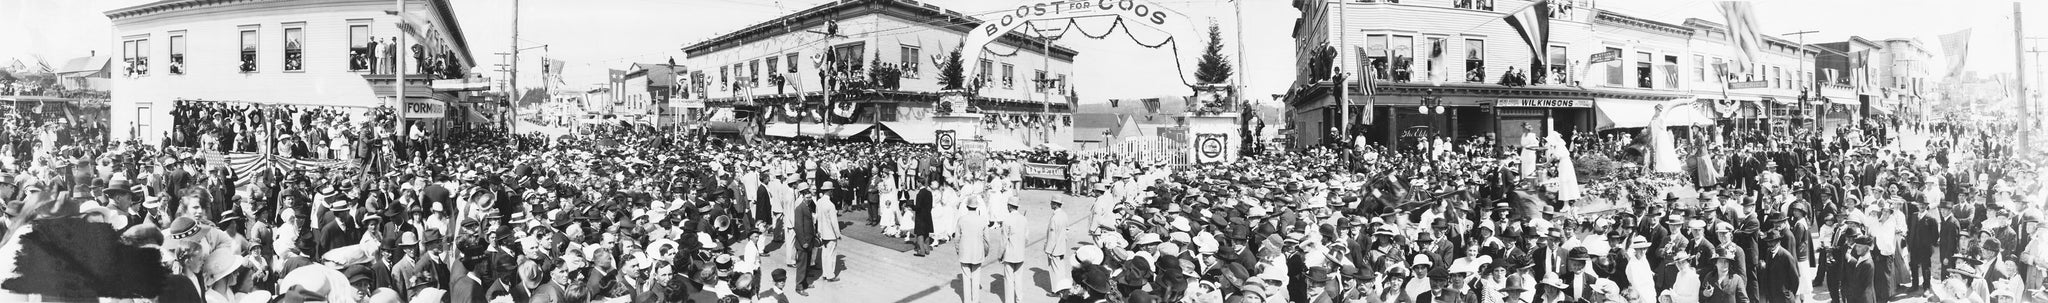 Wedding of Miss Coos Bay to Mr. Eugene Lane during the Railroad Jubilee, August 1916. -- Courtesy Coos History Museum & Maritime Collection / #008-31.2